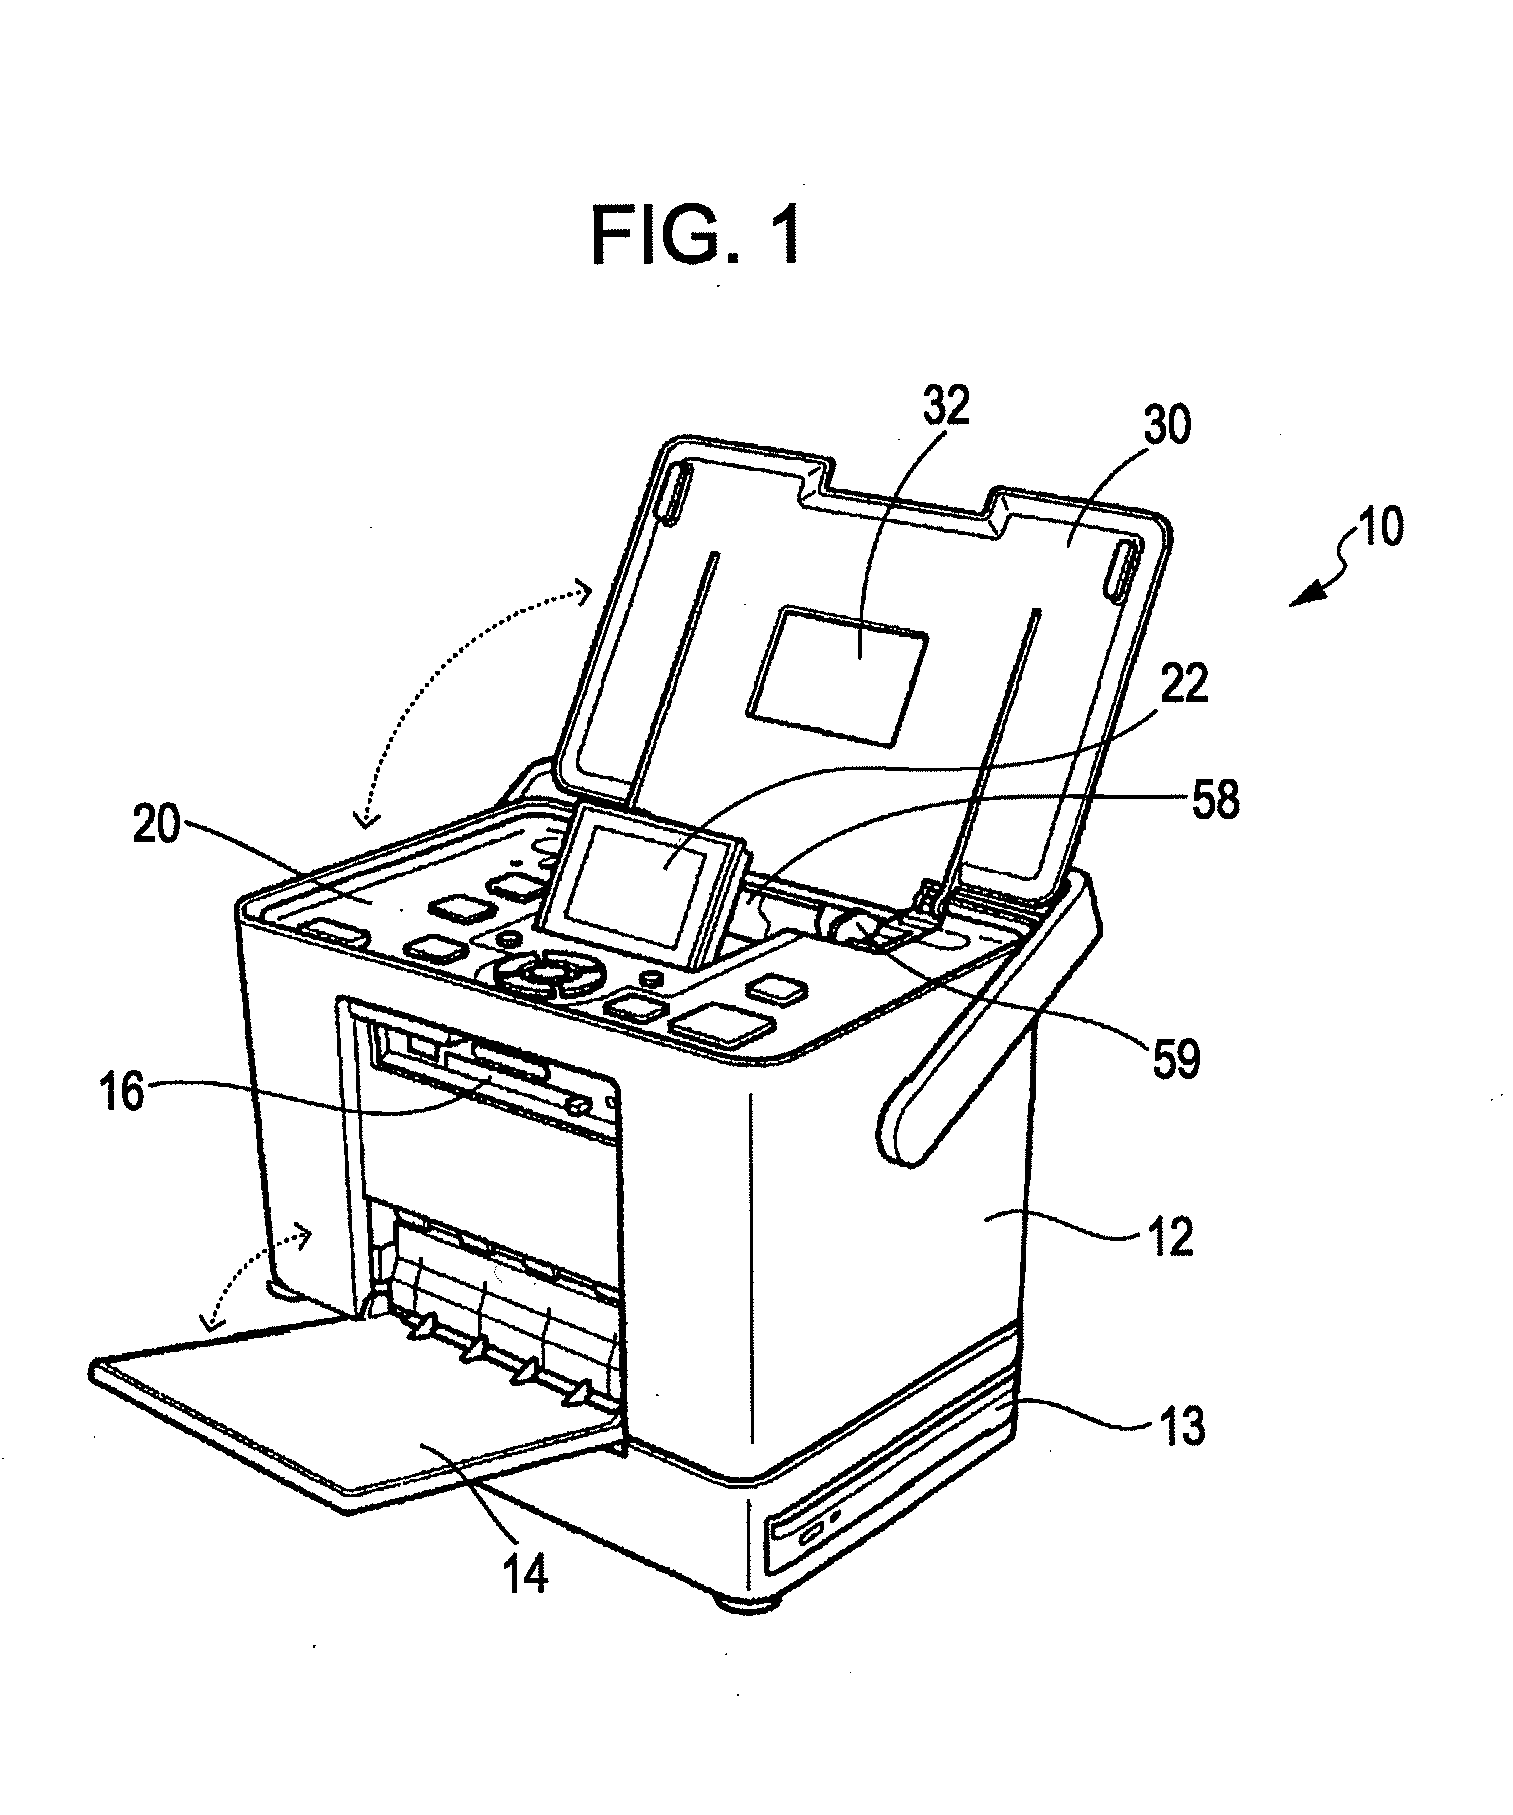 Printer and USB device recognizing method